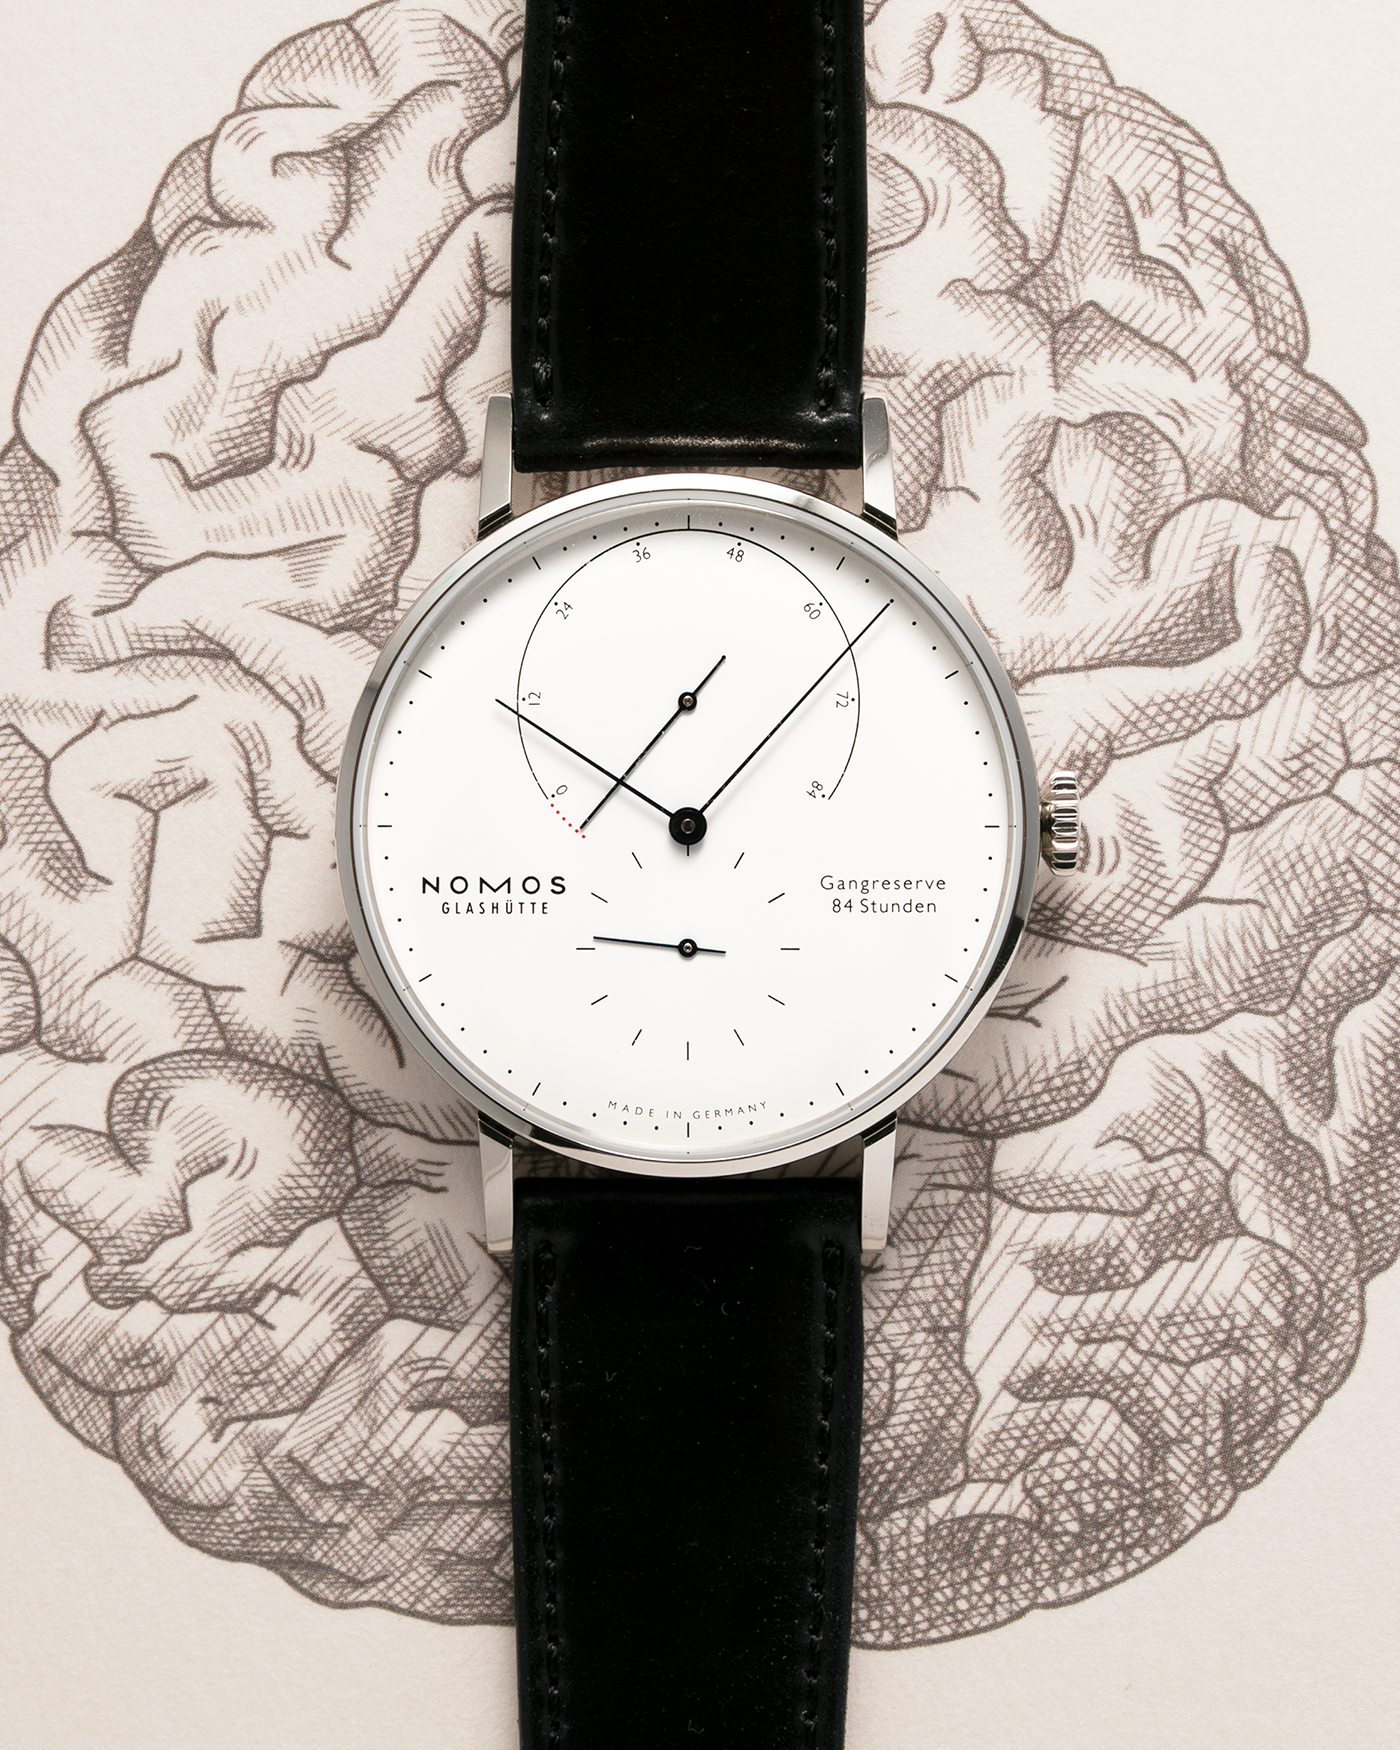 Brand: Nomos Year: 2020 Model: Lambda “175 Years Watchmaking Glashutte” Material: Stainless Steel Movement: Nomos DUW 1001 Case Diameter: 40.5mm Bracelet/Strap: Nomos Black Horween Shell Cordovan with Stainless Steel Tang Buckle